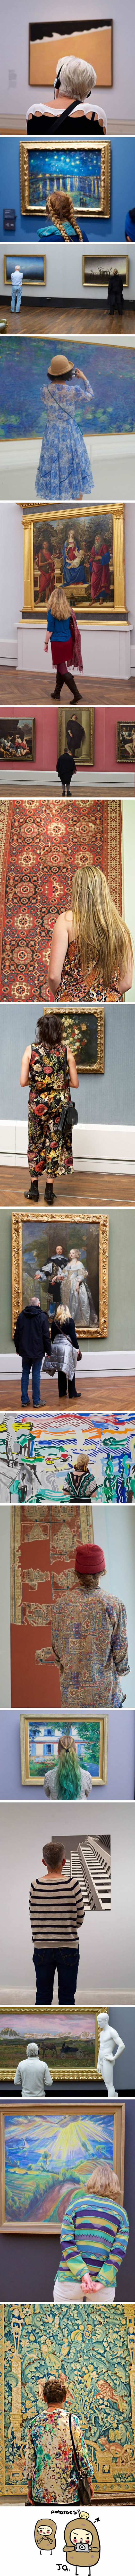 photographer spent months waiting for museum visitors to match the artworks they observe